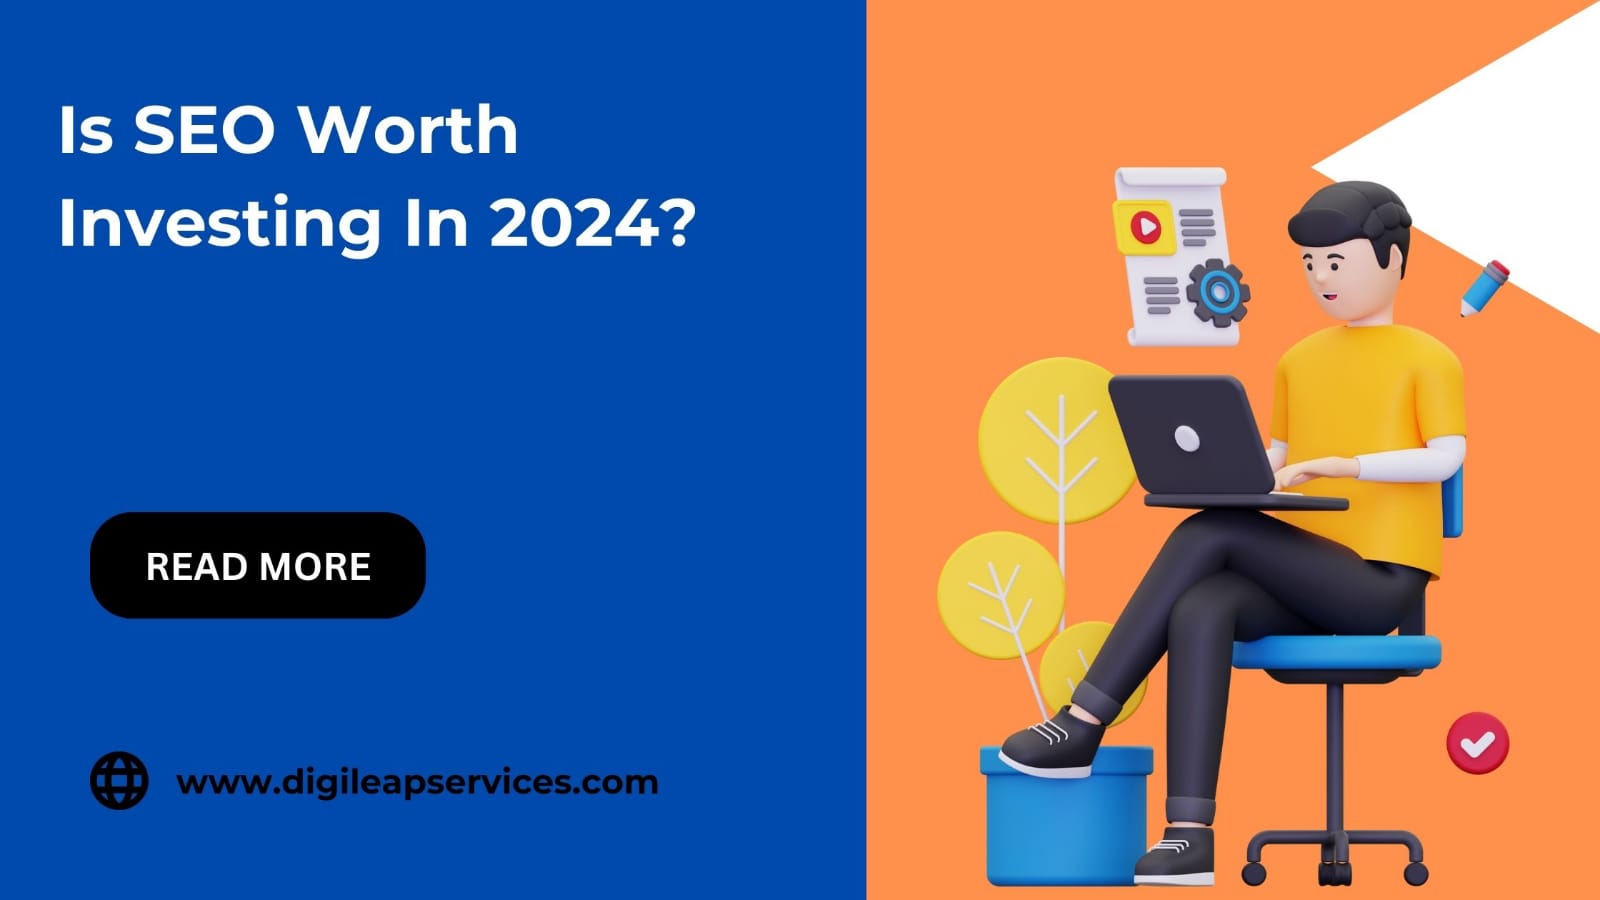 Is SEO Worth Investing In 2024?